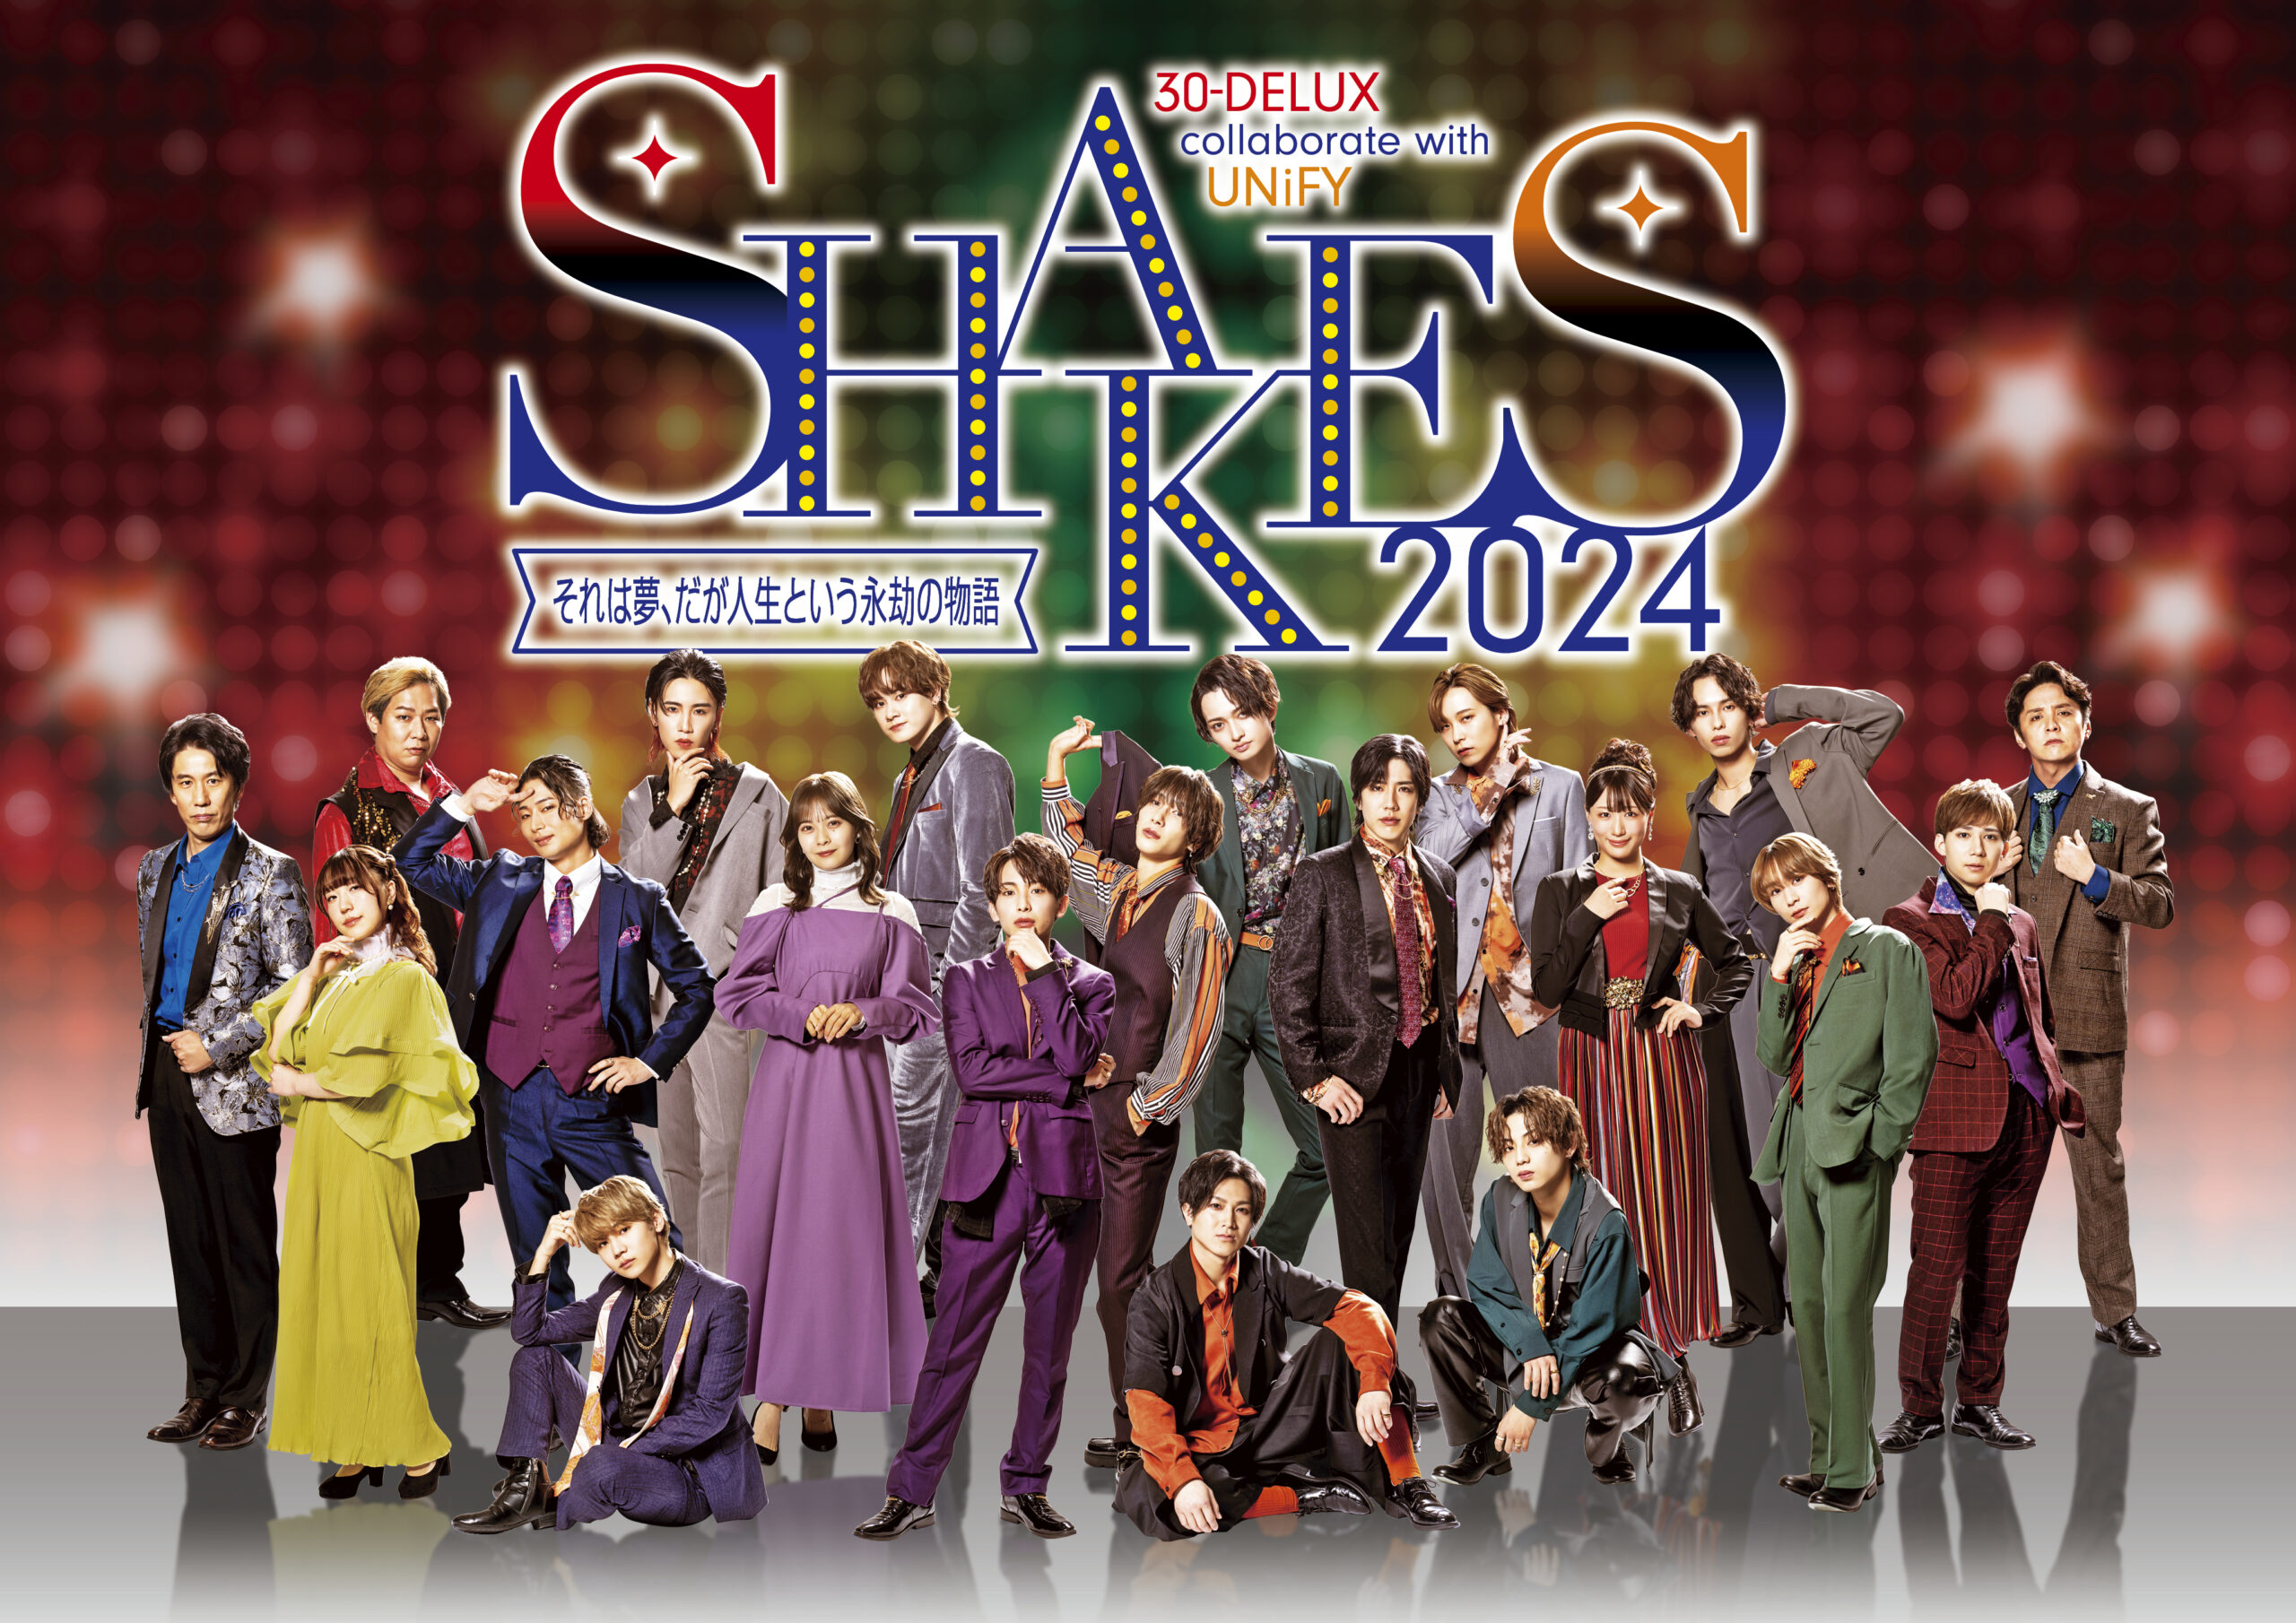 30-DELUX collaborate with UNiFY『SHAKES2024～それは夢、だが人生 